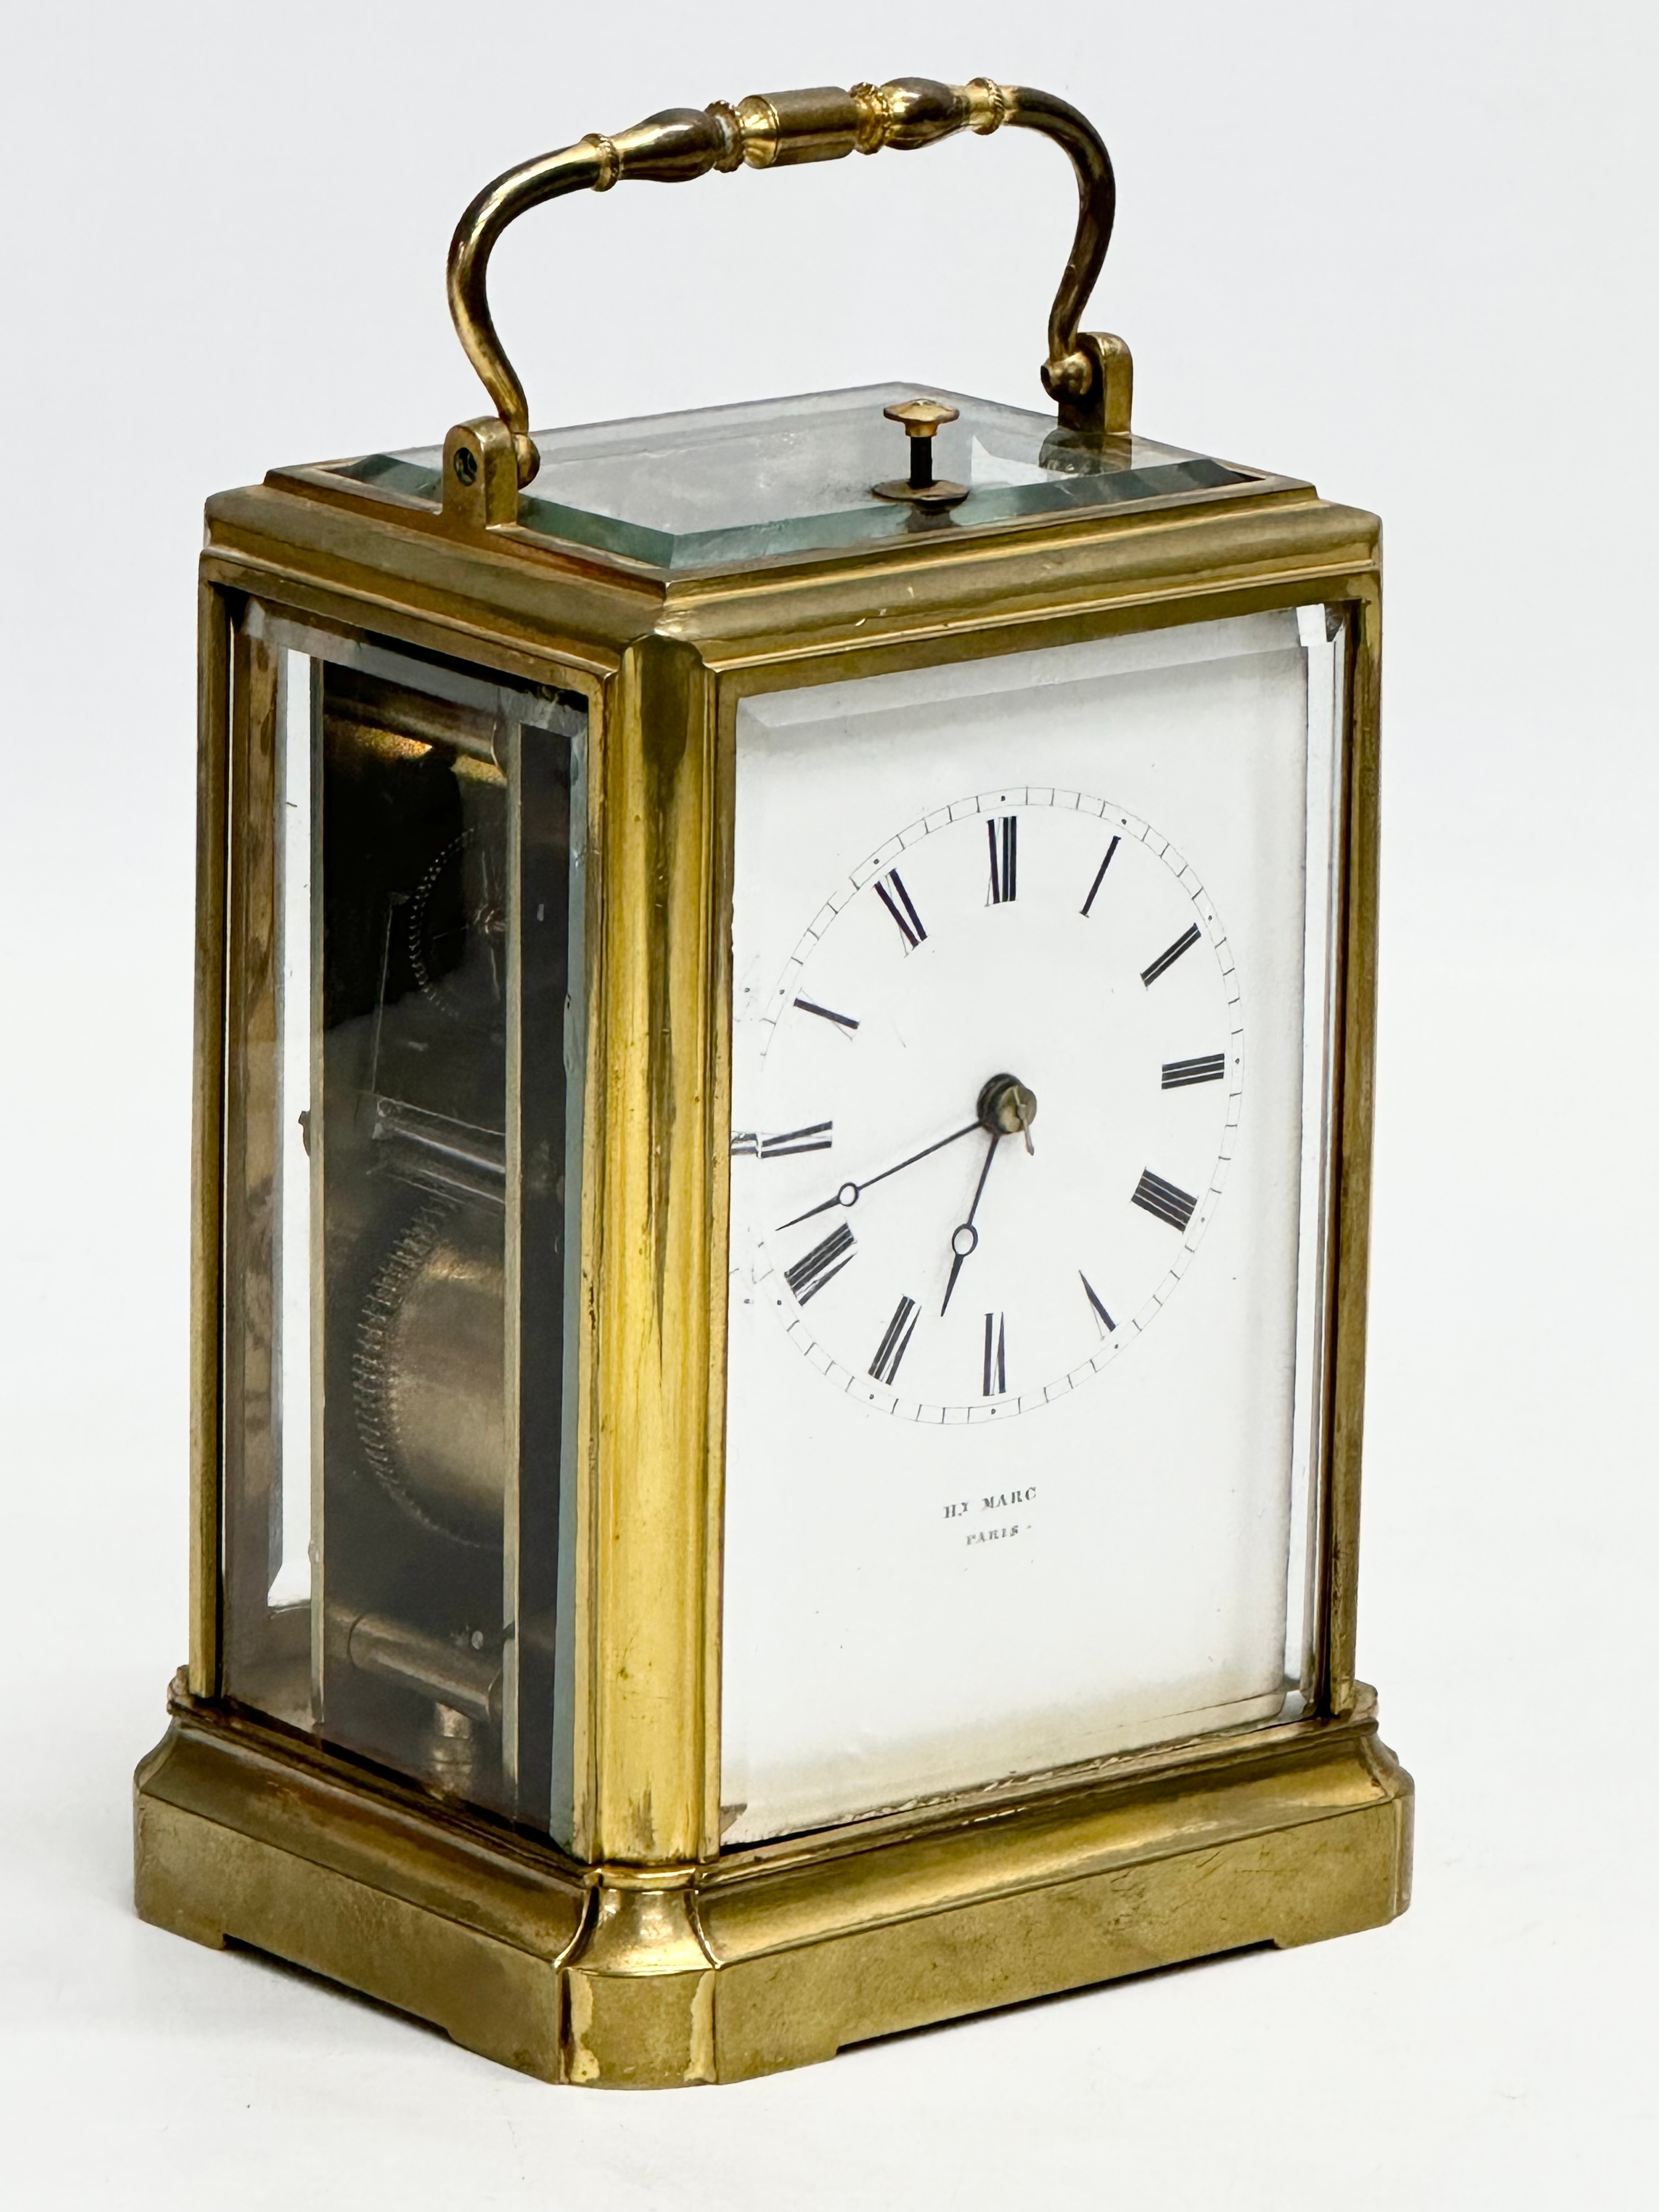 A rare mid 19th century Henry Marc brass Time Repeater Carriage Clock with 4 bevelled glass panels - Image 3 of 6